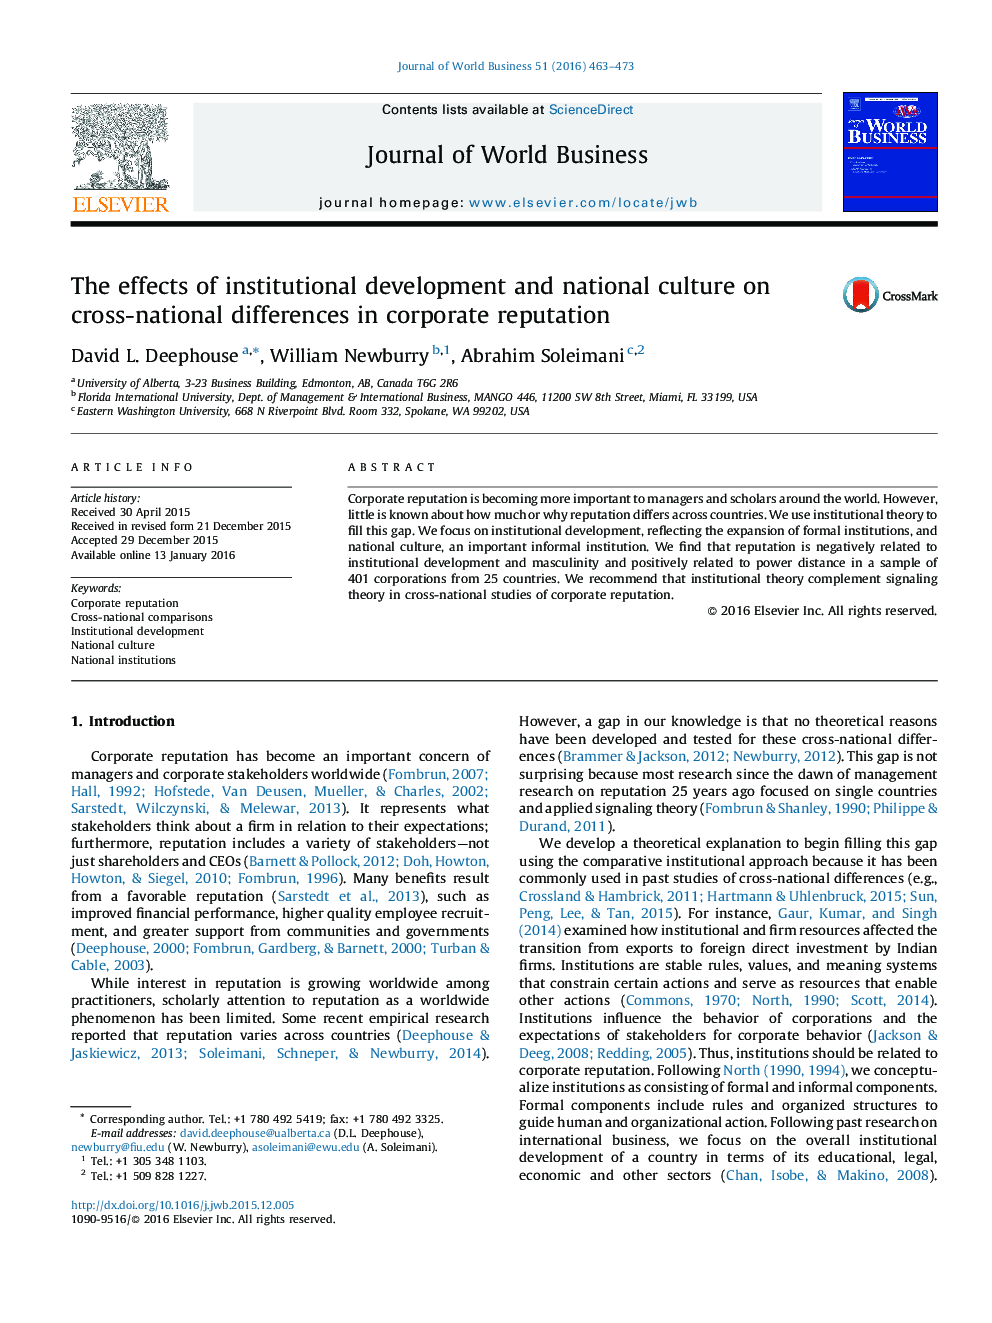 The effects of institutional development and national culture on cross-national differences in corporate reputation